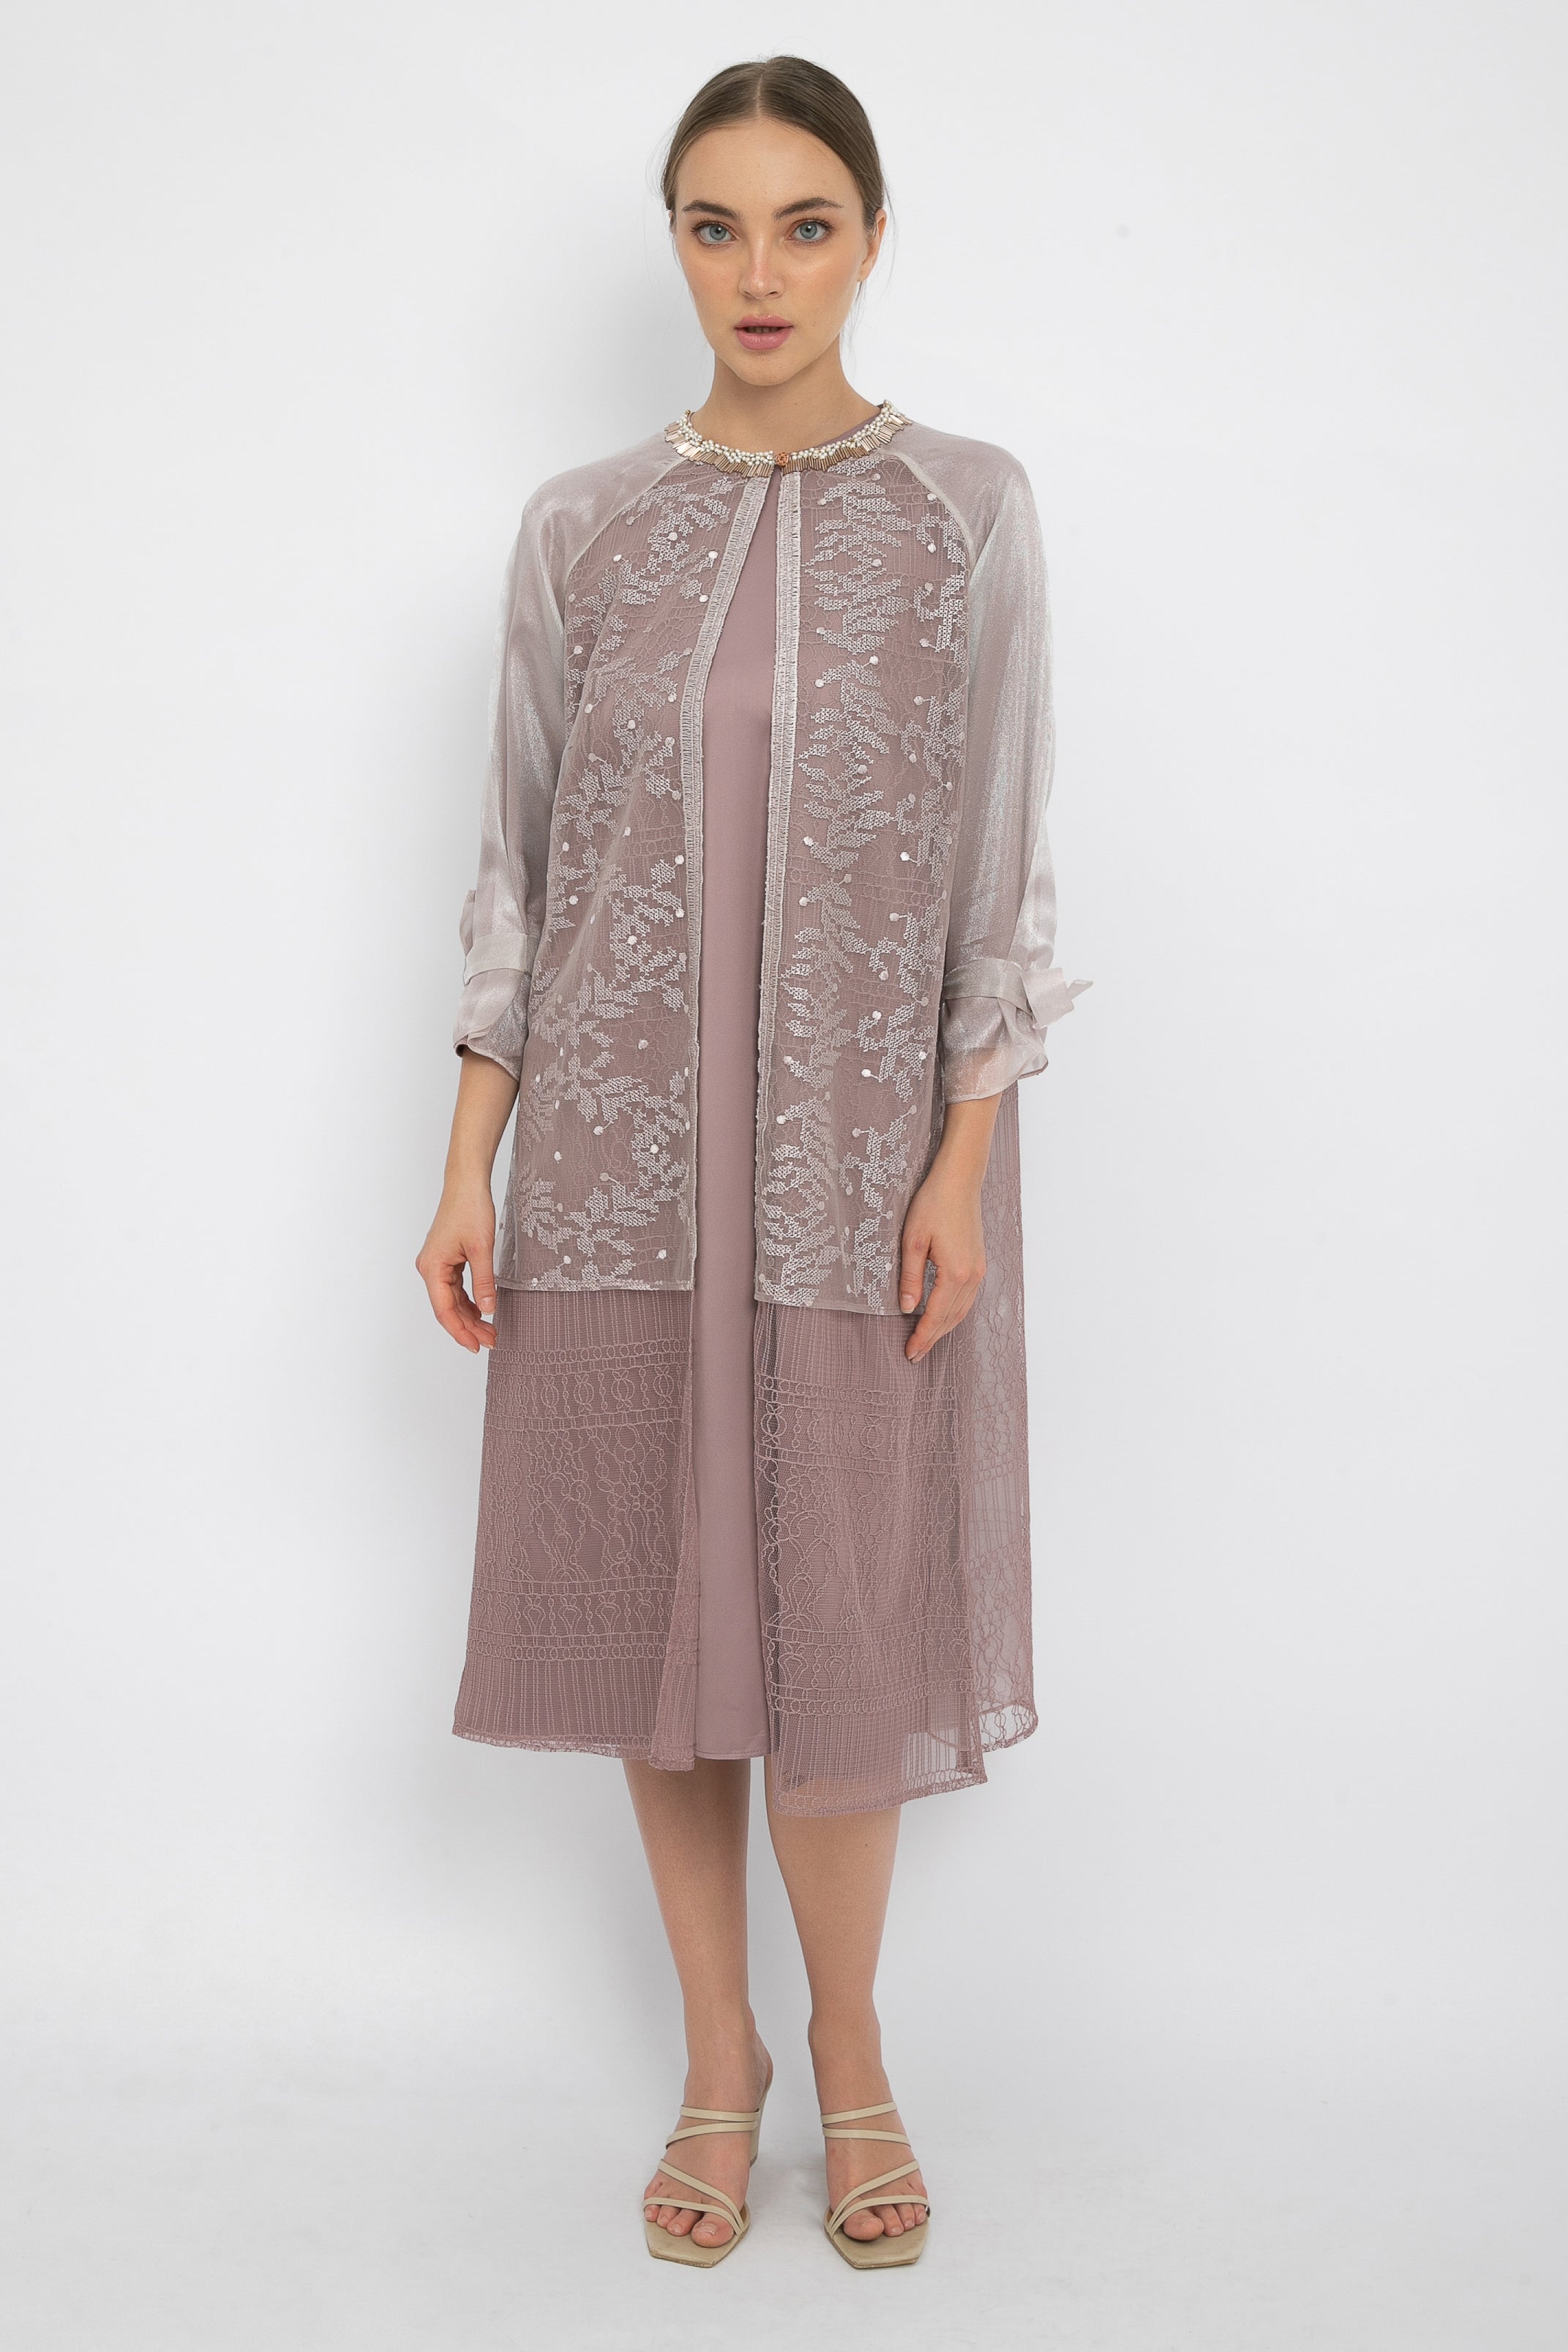 Pippa Outer Dress in Mauve